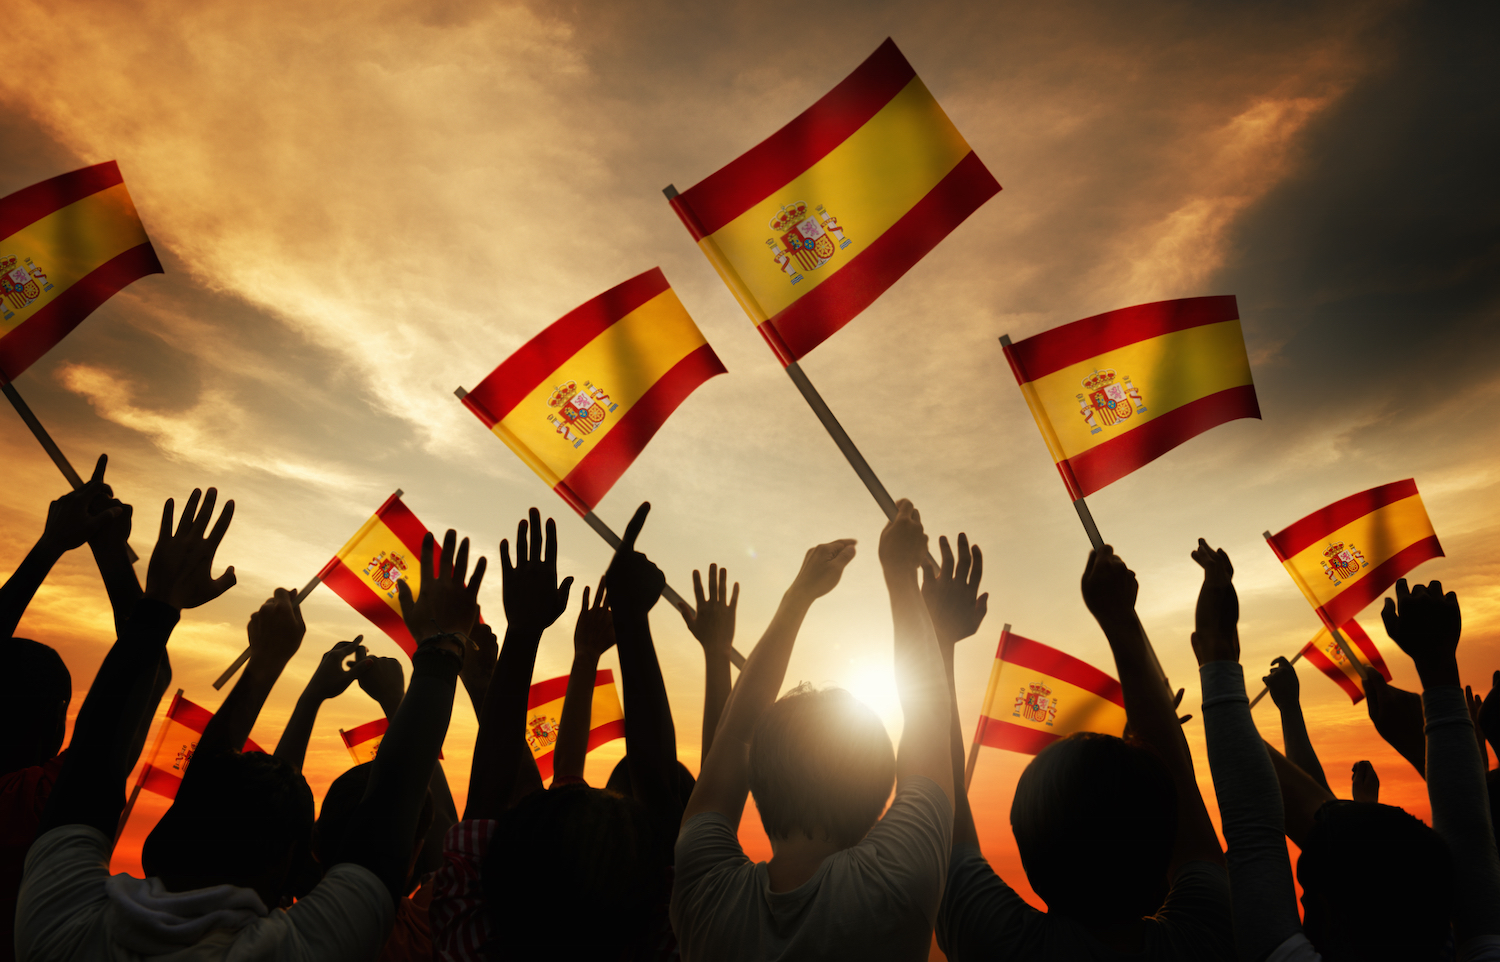 Spain’s-crypto-firms-to-face-new-registration-requirements-under-eu-driven-bill